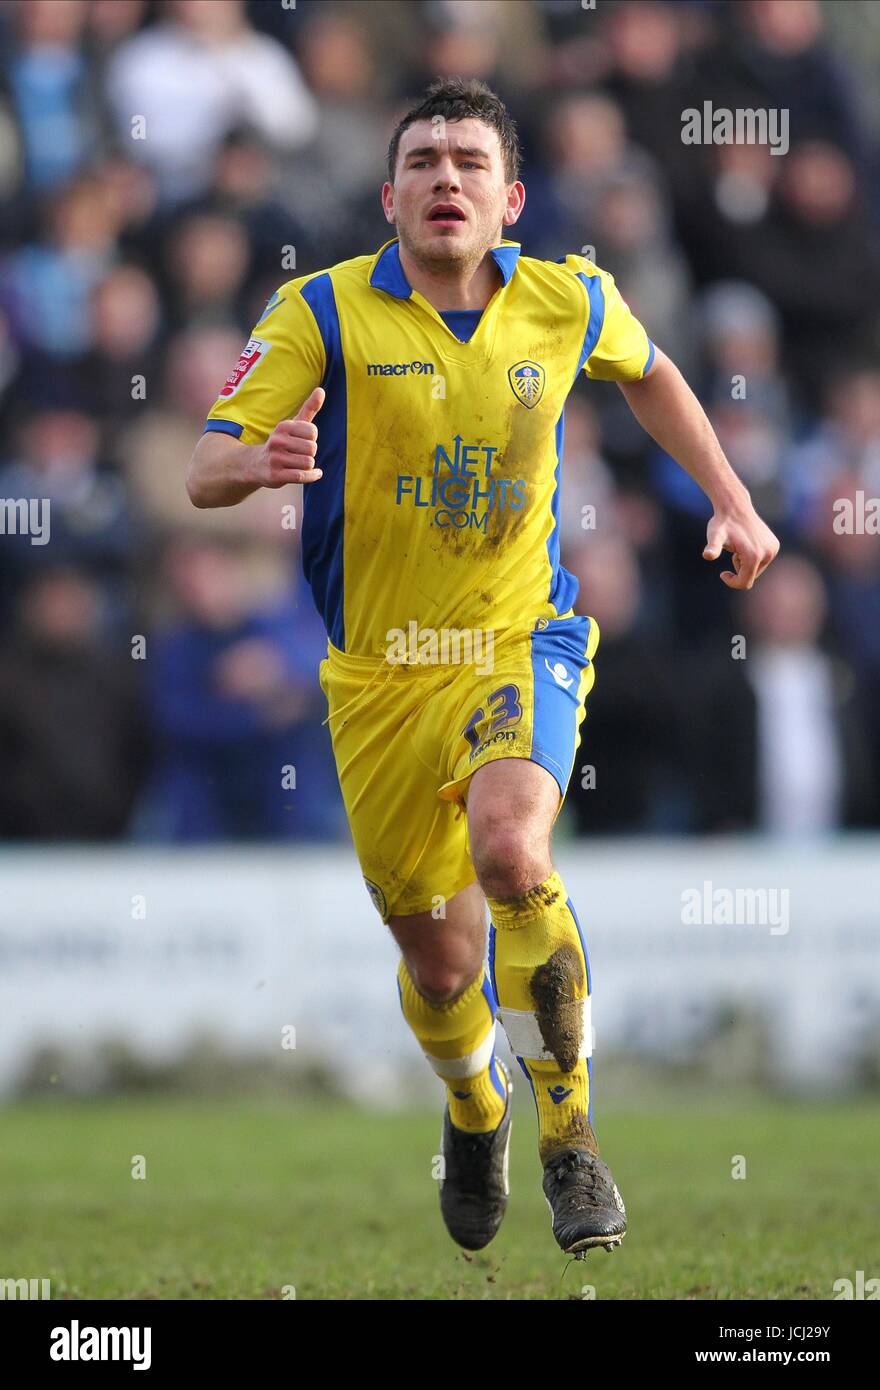 ROBERT SNODGRASS LEEDS UNITED FC STOCKPORT COUNTY V LEEDS UNITED EDGELEY PARK, STOCKPORT, ENGLAND 28 December 2009 GAB7509     WARNING! This Photograph May Only Be Used For Newspaper And/Or Magazine Editorial Purposes. May Not Be Used For, Internet/Online Usage Nor For Publications Involving 1 player, 1 Club Or 1 Competition, Without Written Authorisation From Football DataCo Ltd. For Any Queries, Please Contact Football DataCo Ltd on +44 (0) 207 864 9121 Stock Photo